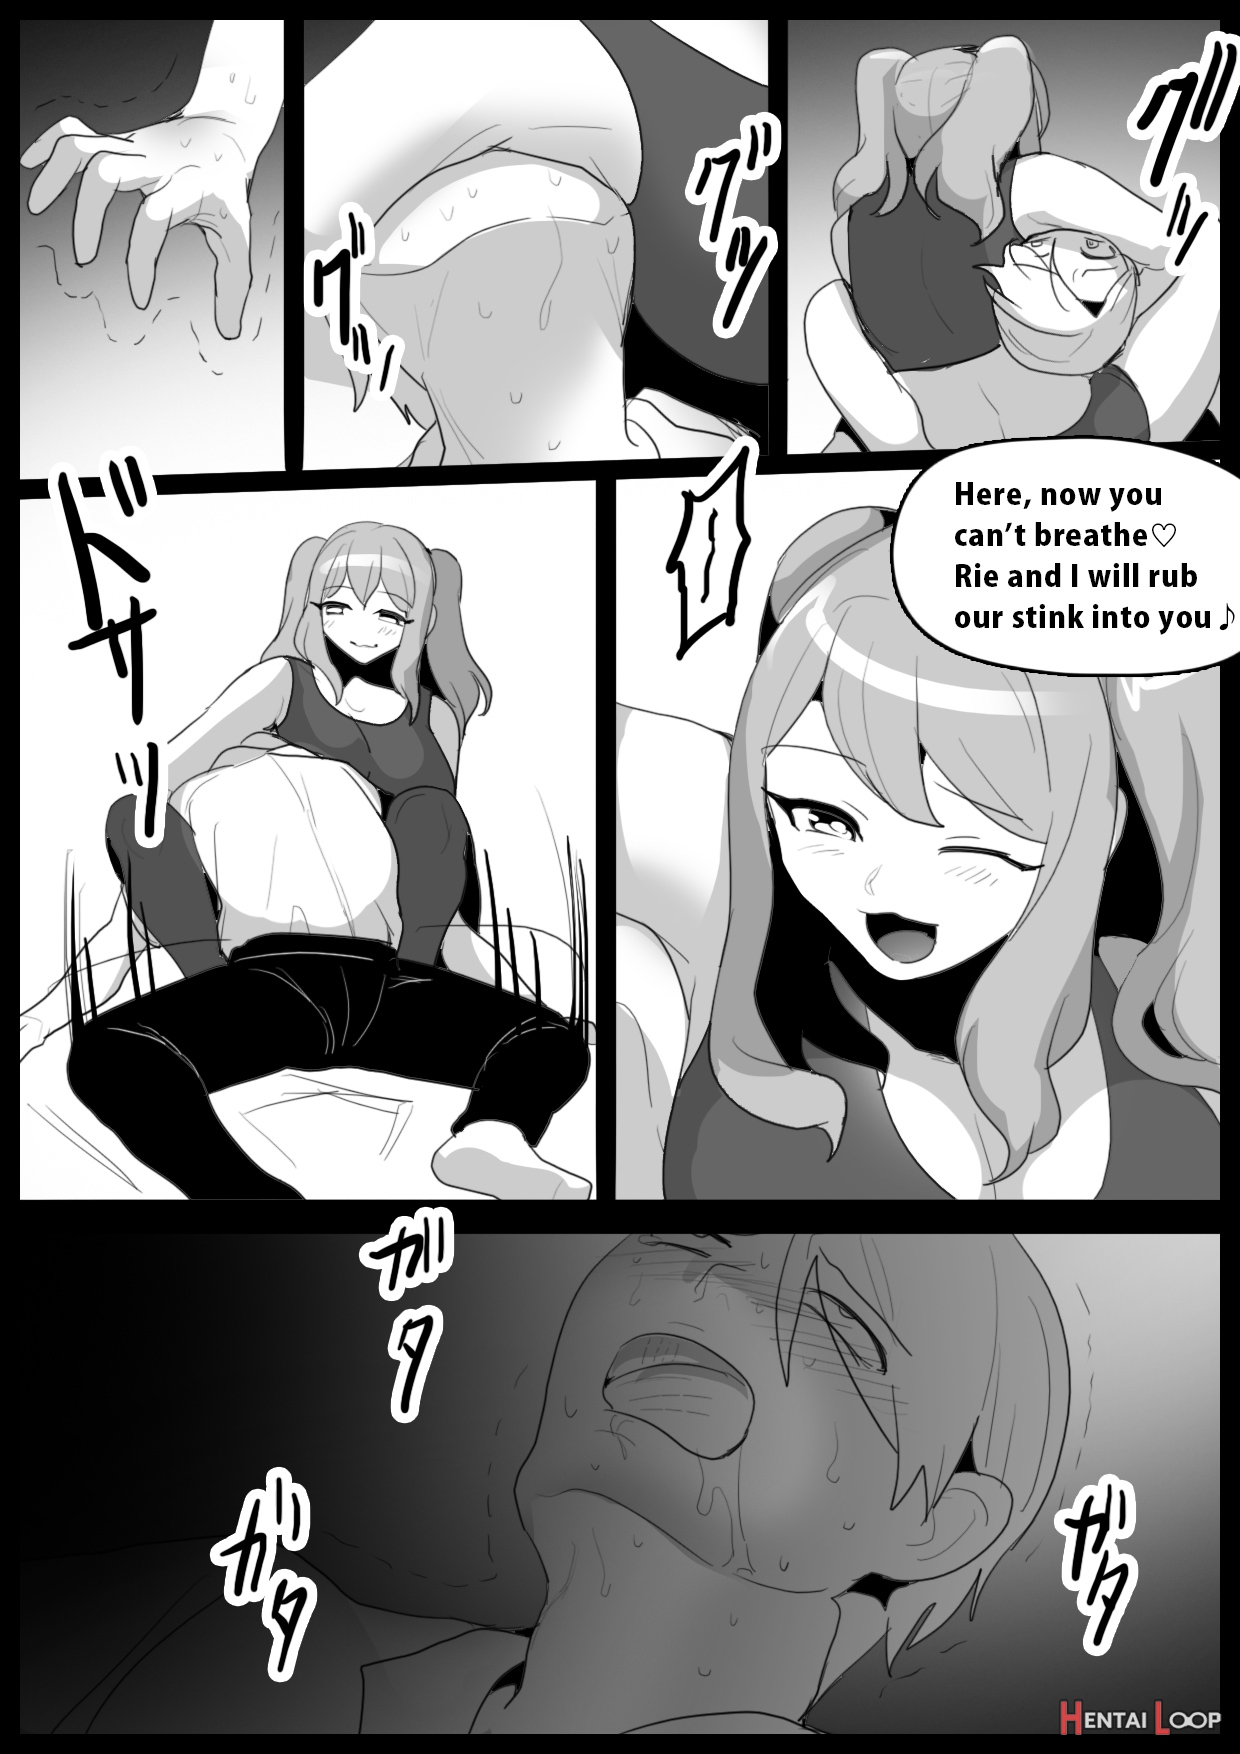 Girls Beat! -vs Aina & Rie- page 10